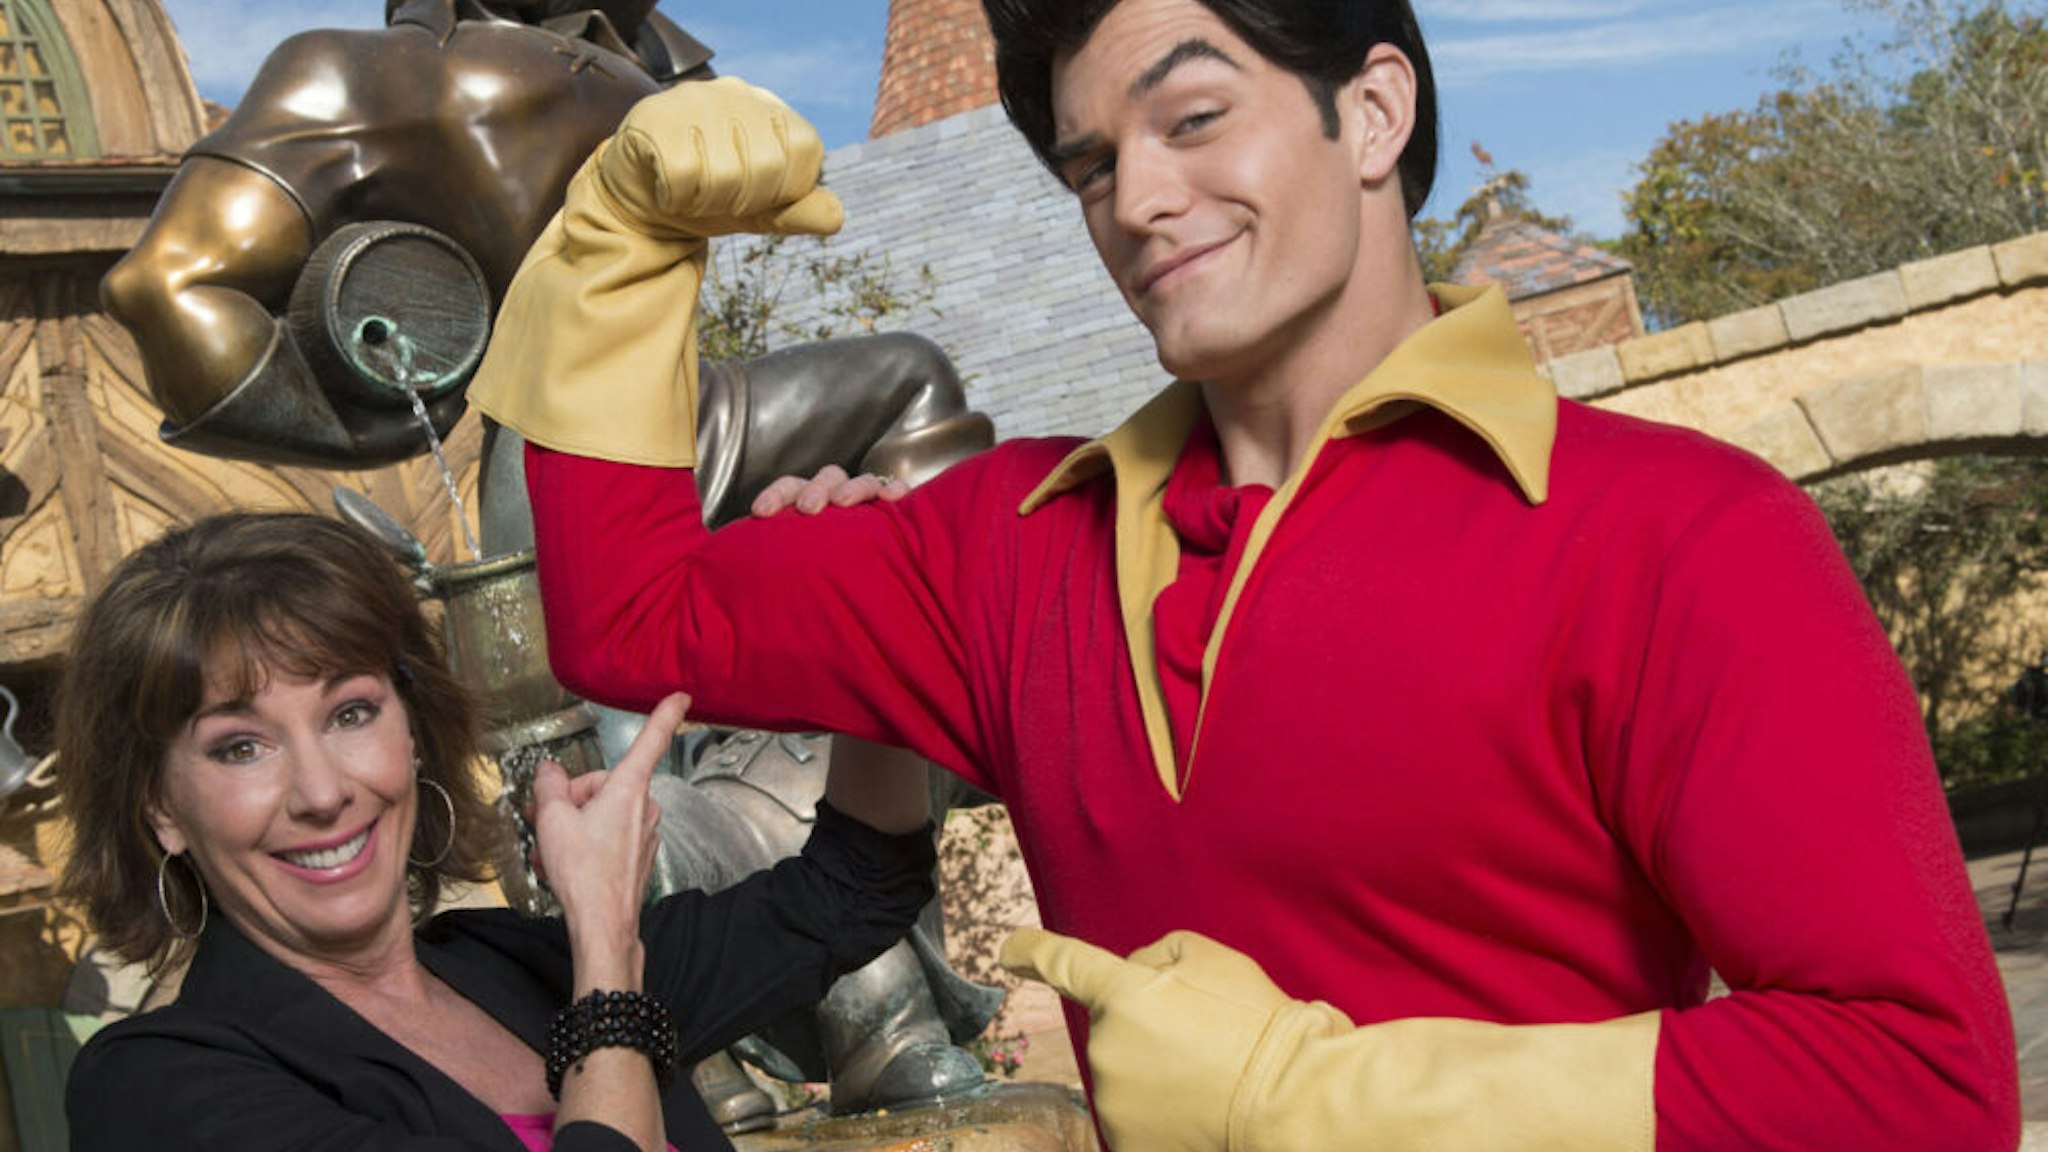 LAKE BUENA VISTA, FL - DECEMBER 05: In this handout image provided by Disney Parks, Broadway and recording star Paige O'Hara poses with Disney's "Beauty and the Beast" character Gaston in New Fantasyland December 5, 2012 at the Magic Kingdom park at Walt Disney World in Lake Buena Vista, Florida. The new land, which holds its official Grand Opening tomorrow, features several settings and scenes from Disney's "Beauty and the Beast," including Gaston's Tavern. O'Hara, who was honored as a "Disney Legend" in 2011, provided the singing and speaking voice for Belle, the animated star of "Beauty and the Beast."